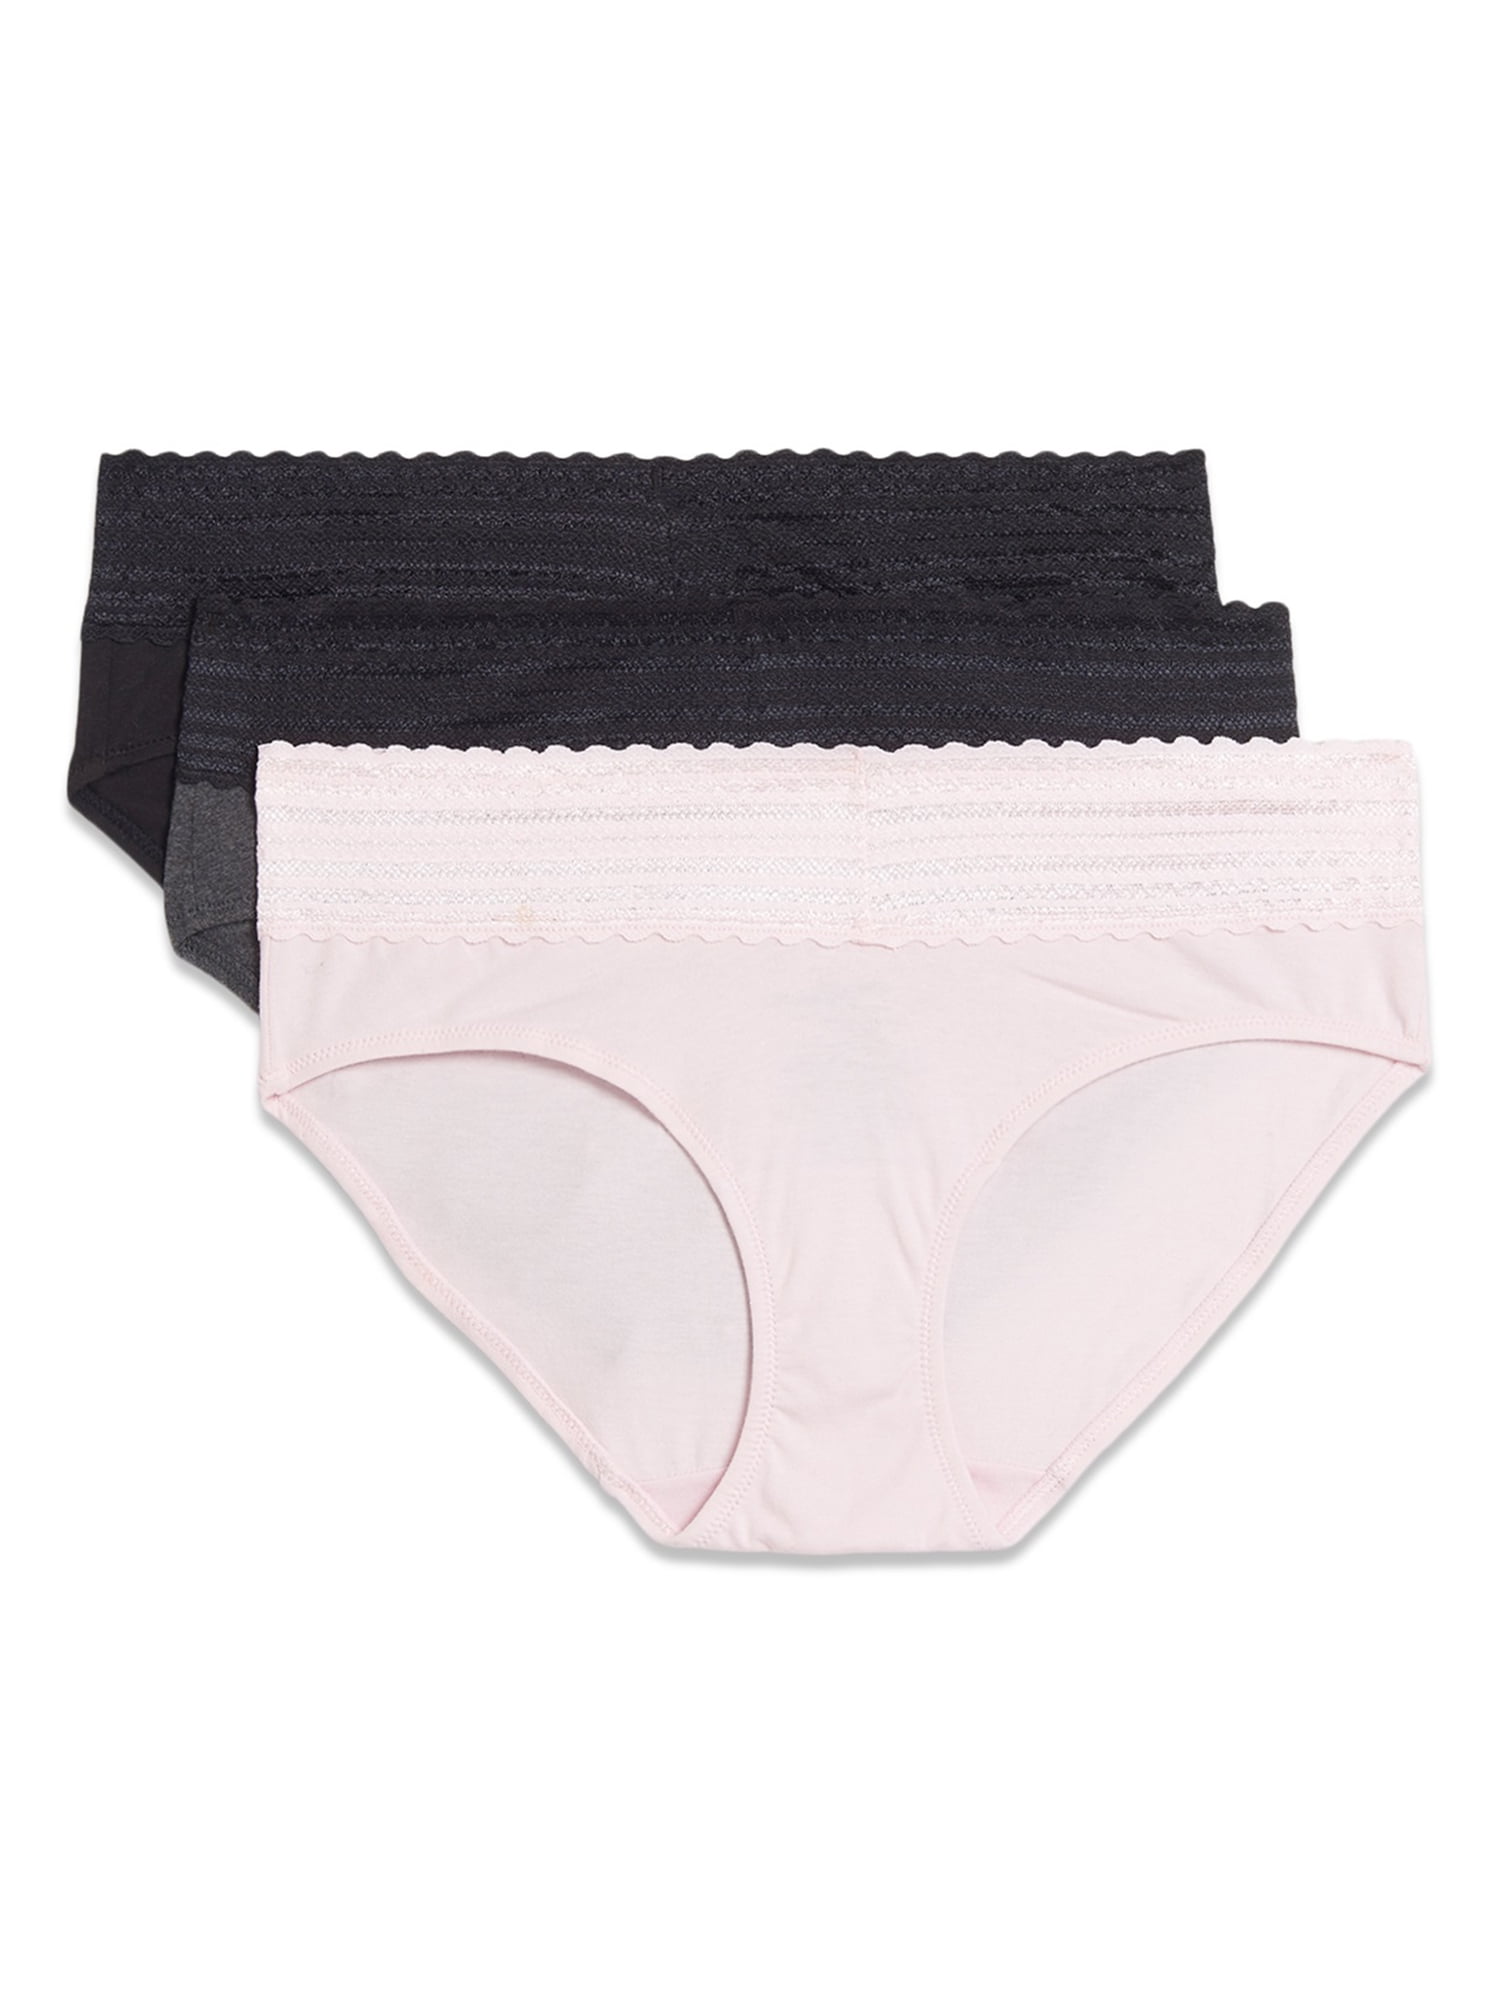 Warners Blissful Benefits Dig-Free Microfiber Brief 3-Pack RS9043W